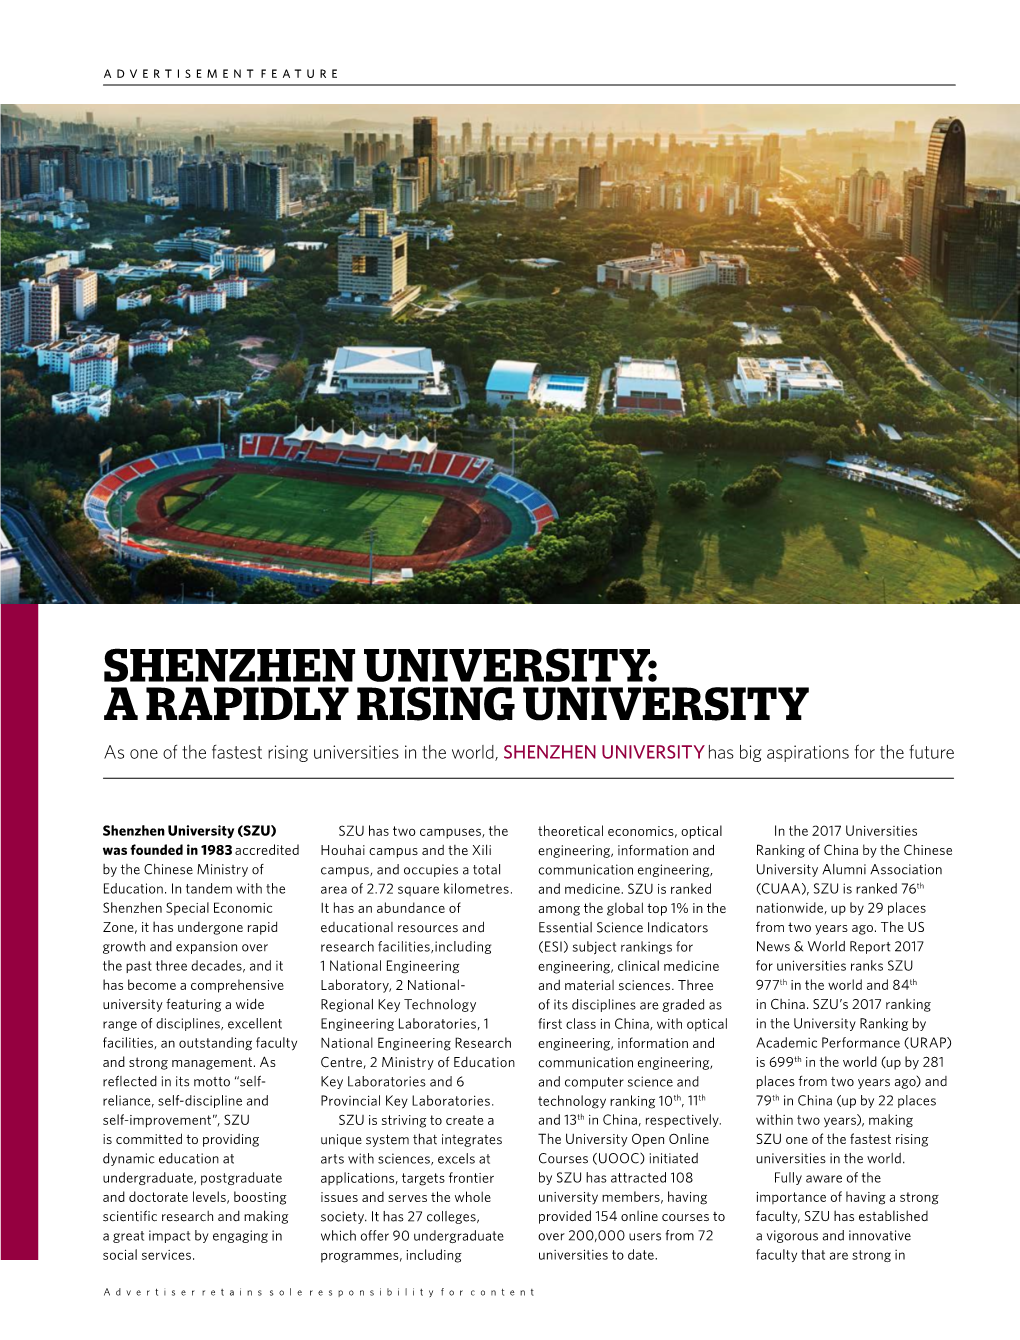 SHENZHEN UNIVERSITY: a RAPIDLY RISING UNIVERSITY As One of the Fastest Rising Universities in the World, SHENZHEN UNIVERSITY Has Big Aspirations for the Future